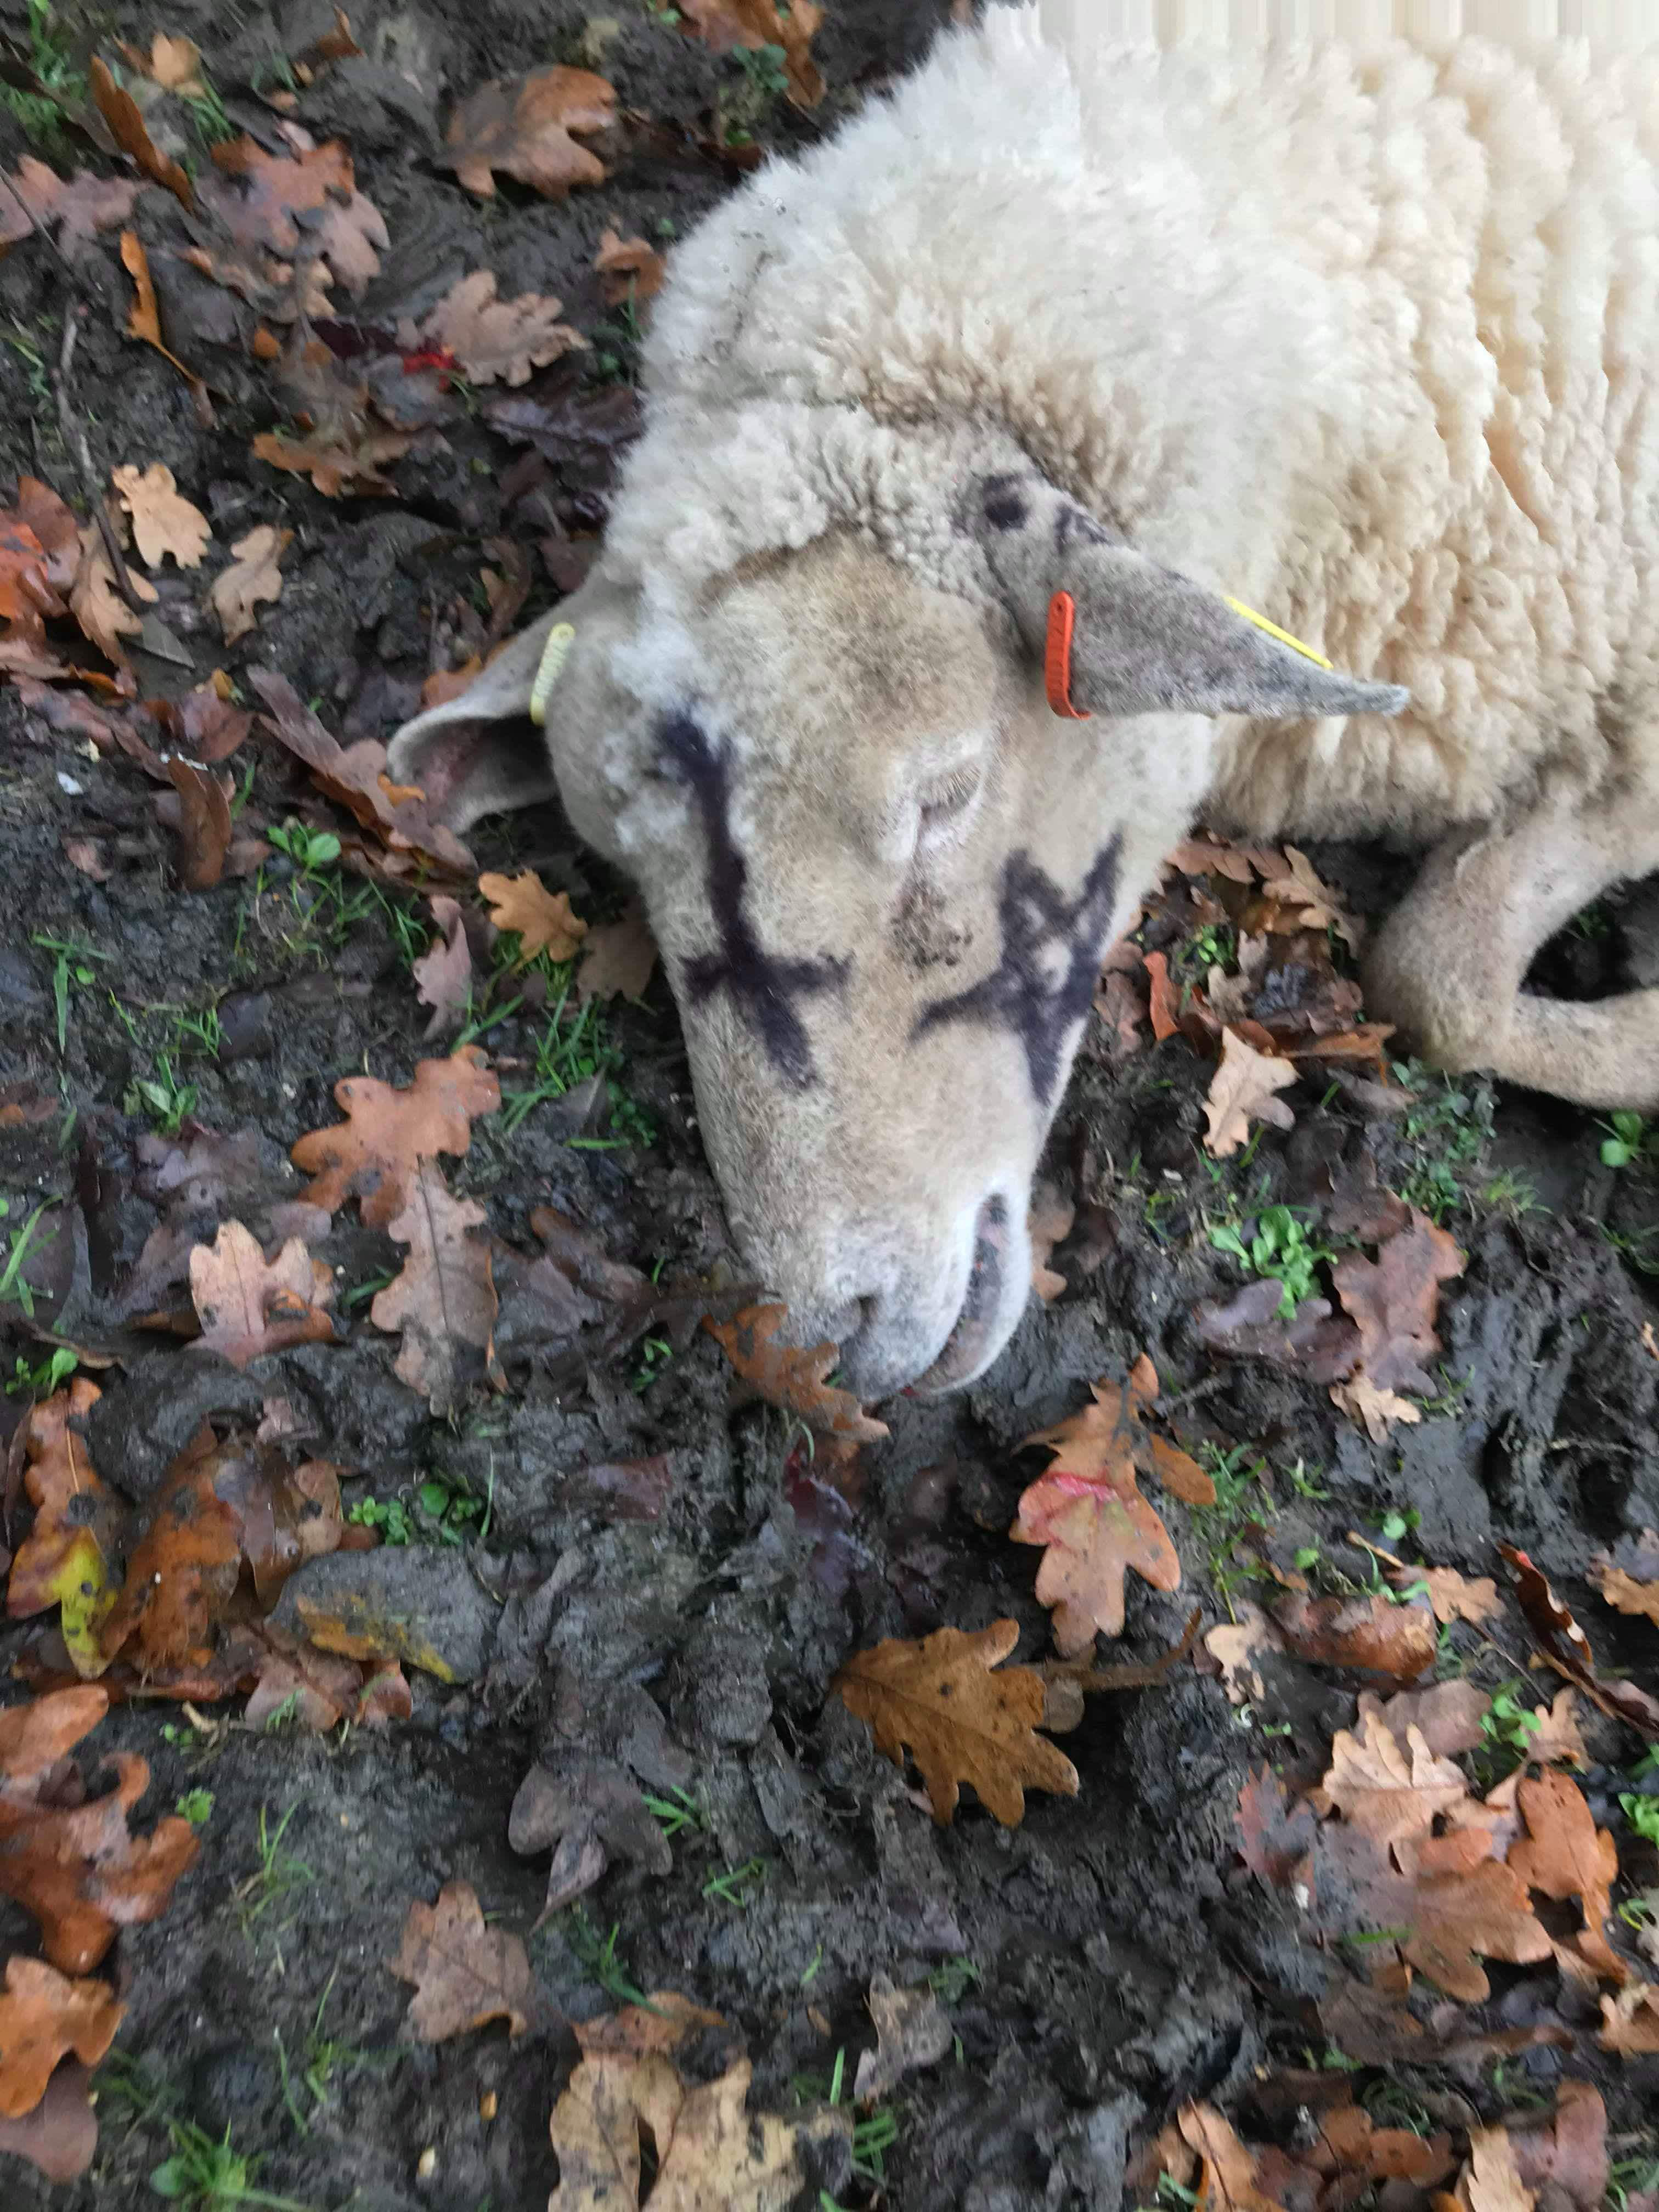 Animals targeted in 'occult' attacks in the New Forest | Rhyl Journal